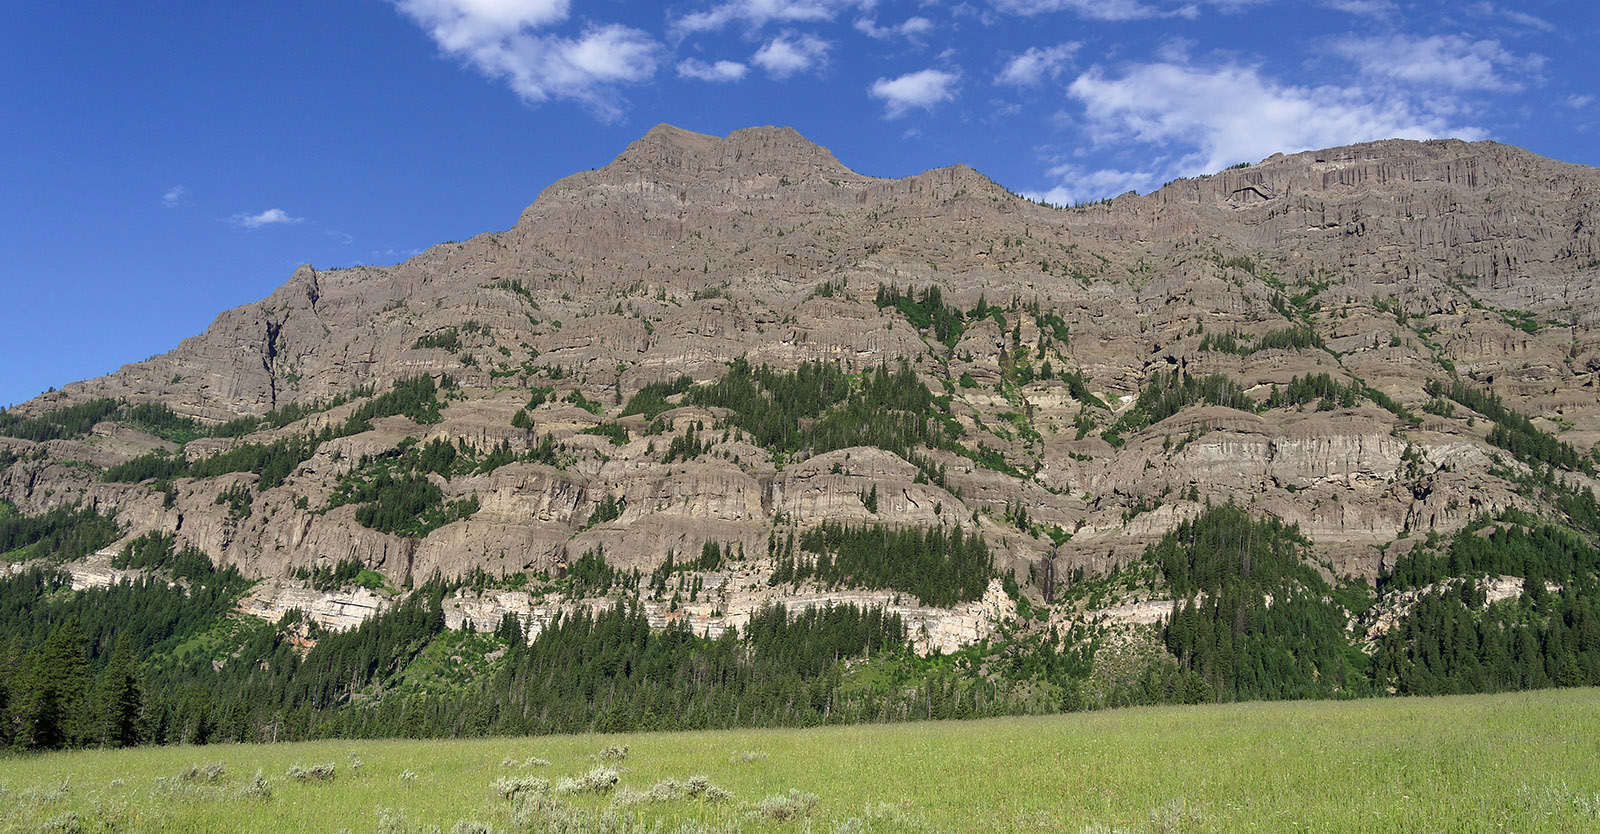 Barronette Peak at the eastern entrance to Yellowstone National Park formed from epiclastic material and air-fall tuff that originated from several andesitic volcanoes in the Absaroka Volcanic Supergroup that were active 20-30 million years prior to Yellowstone eruptions.